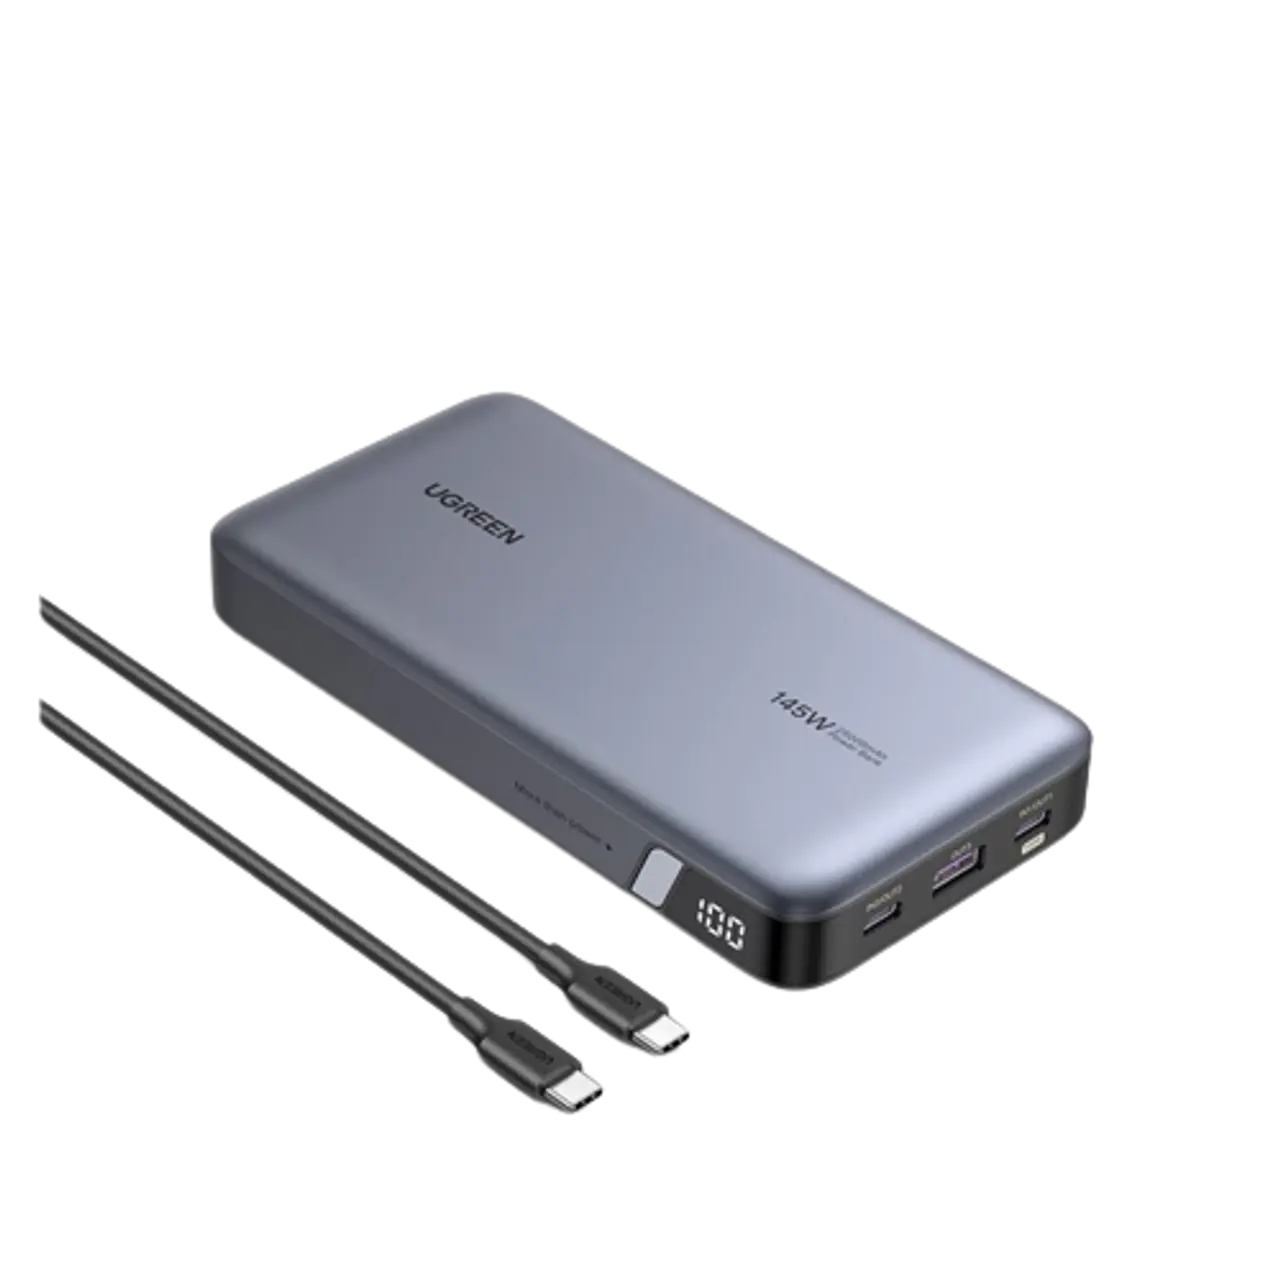 UGREEN 145W Output Portable Power Bank Charger Compatible with Laptops, MacBook Pro/Air, iPhone, Samsung etc .. | 90597A Ugreen